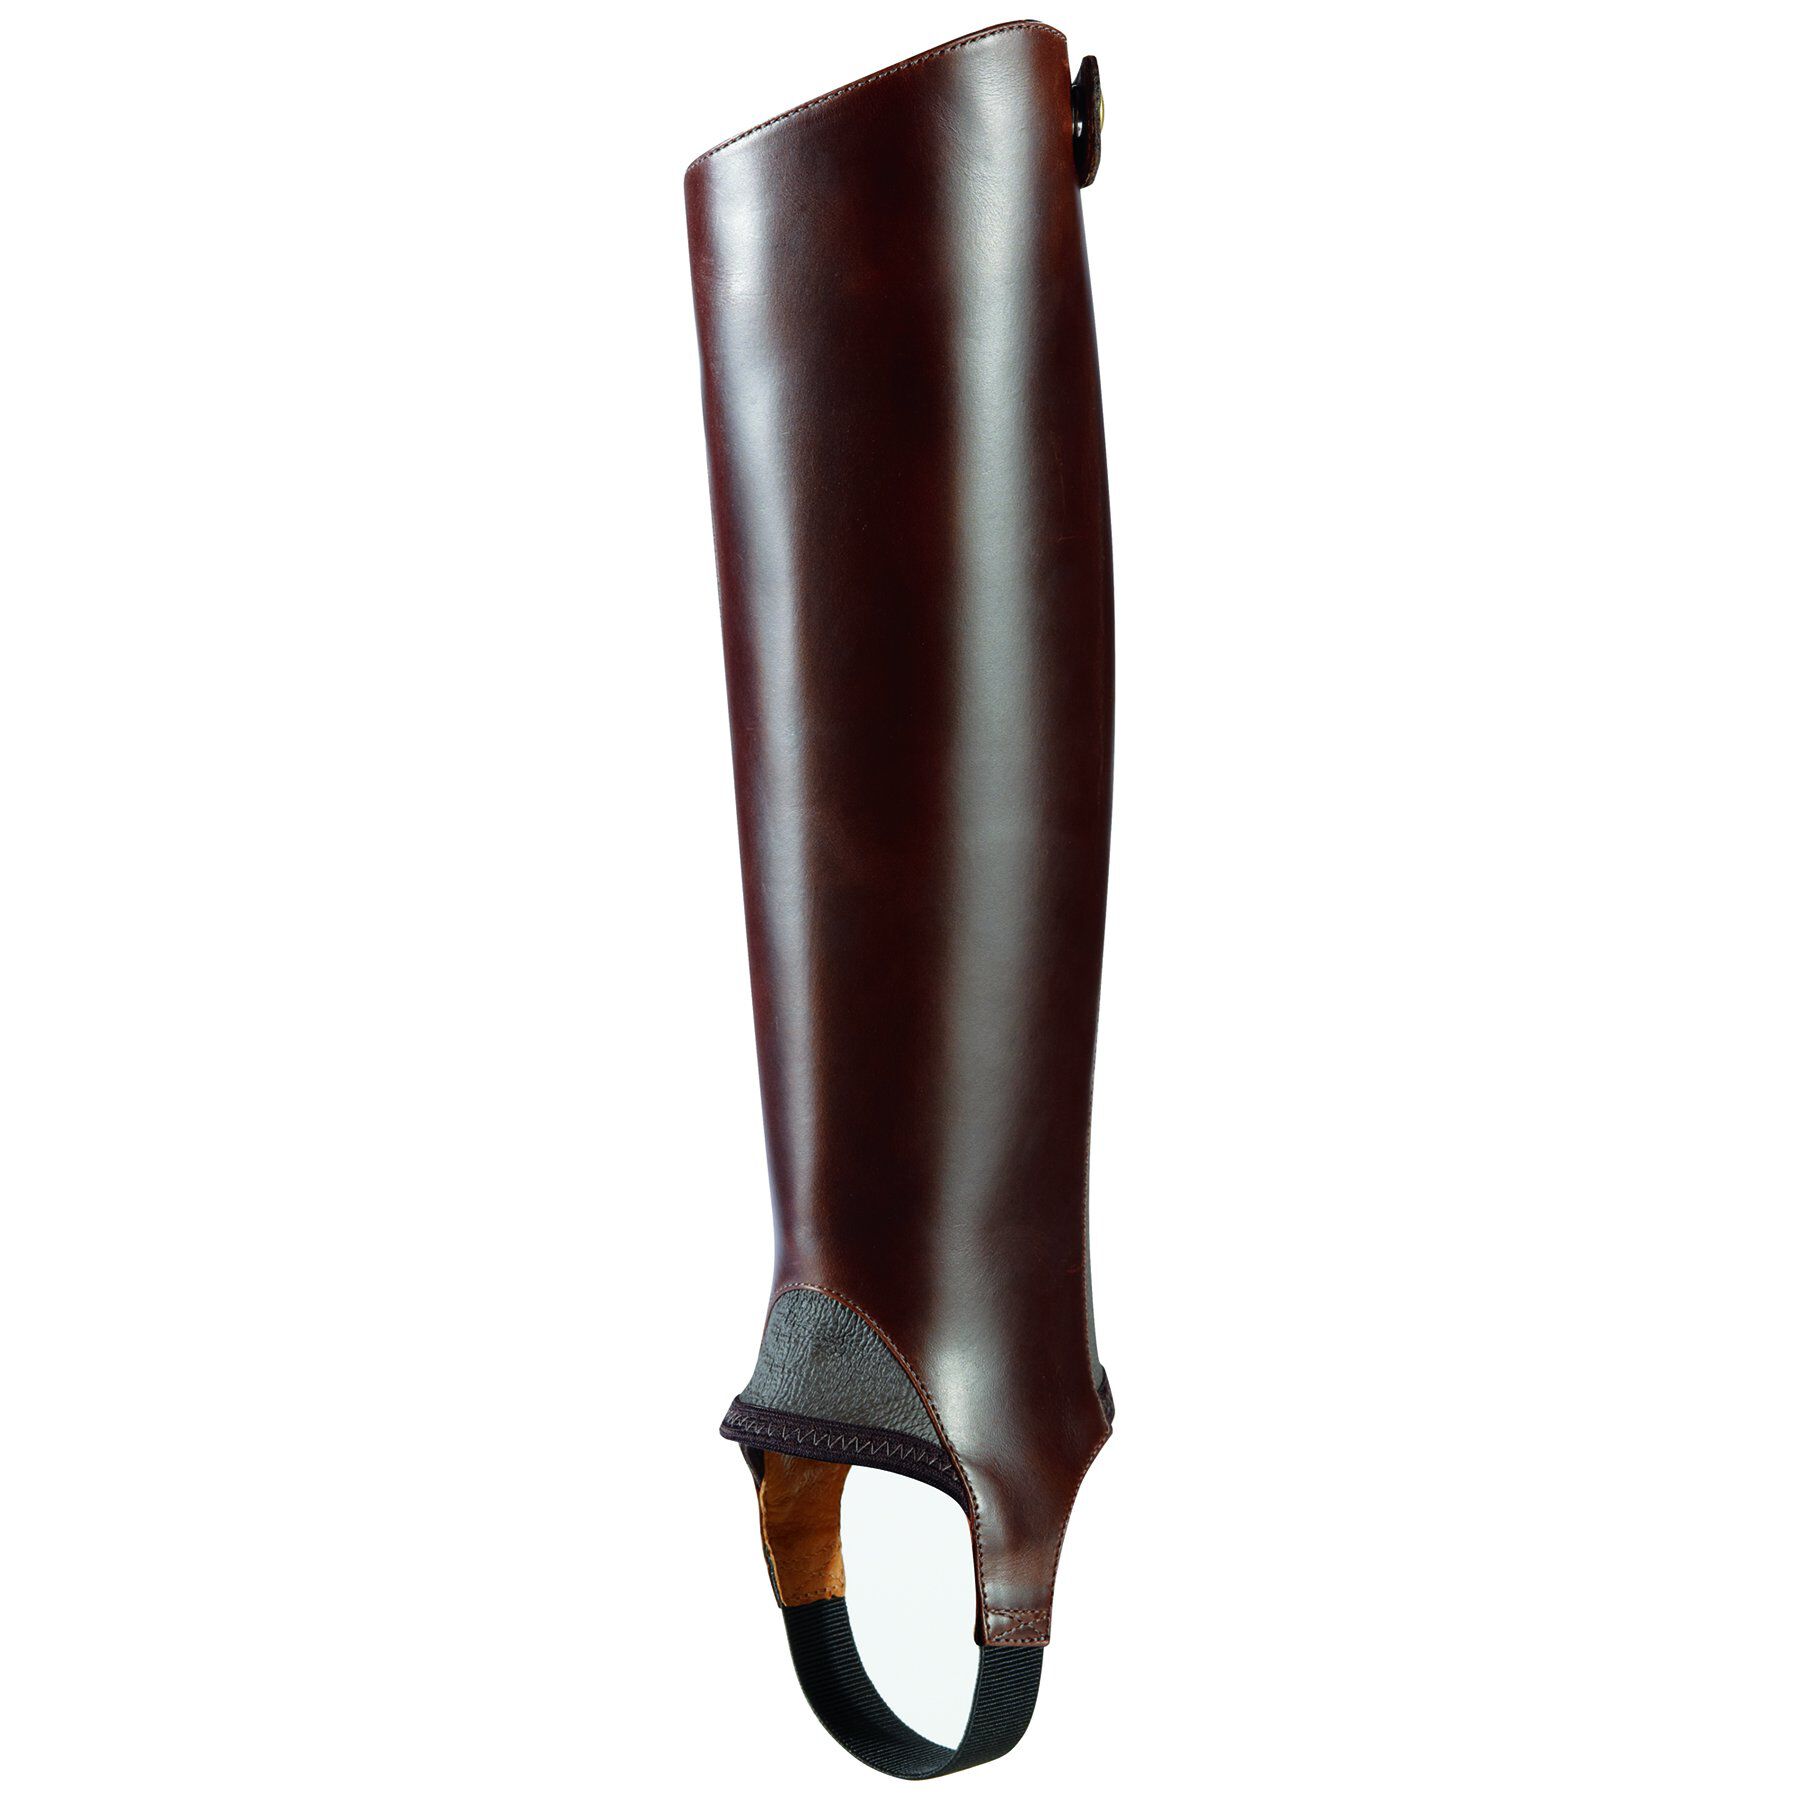 Ariat Close Contact Chaps WAXED CHOCOLATE Various Sizes Available 